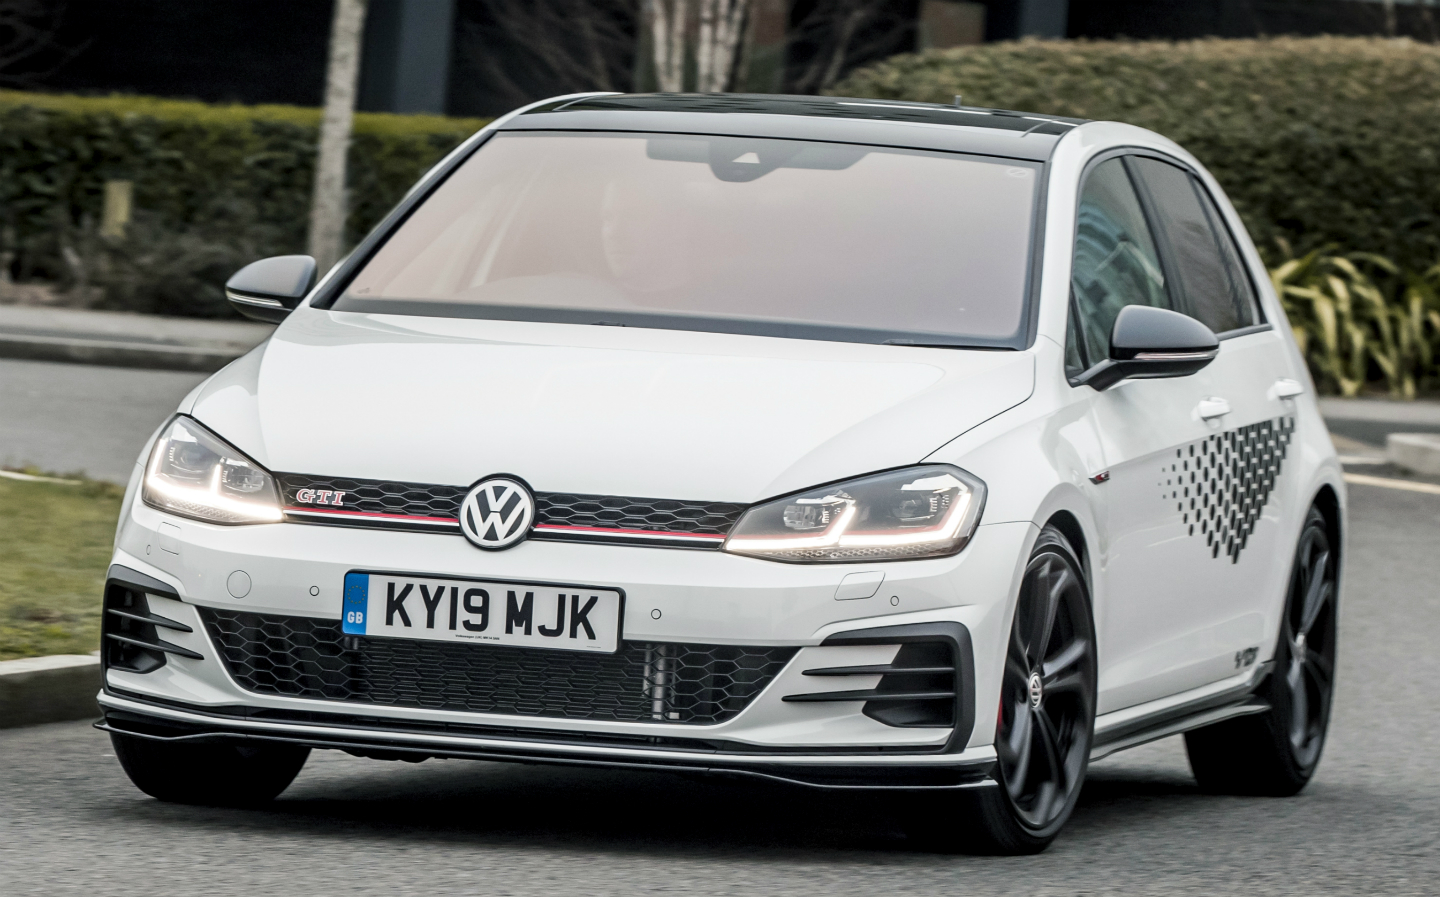 Sunday Times Motor Awards 2019 Best Hot Hatch of the Year. Volkswagen Golf GTI TCR